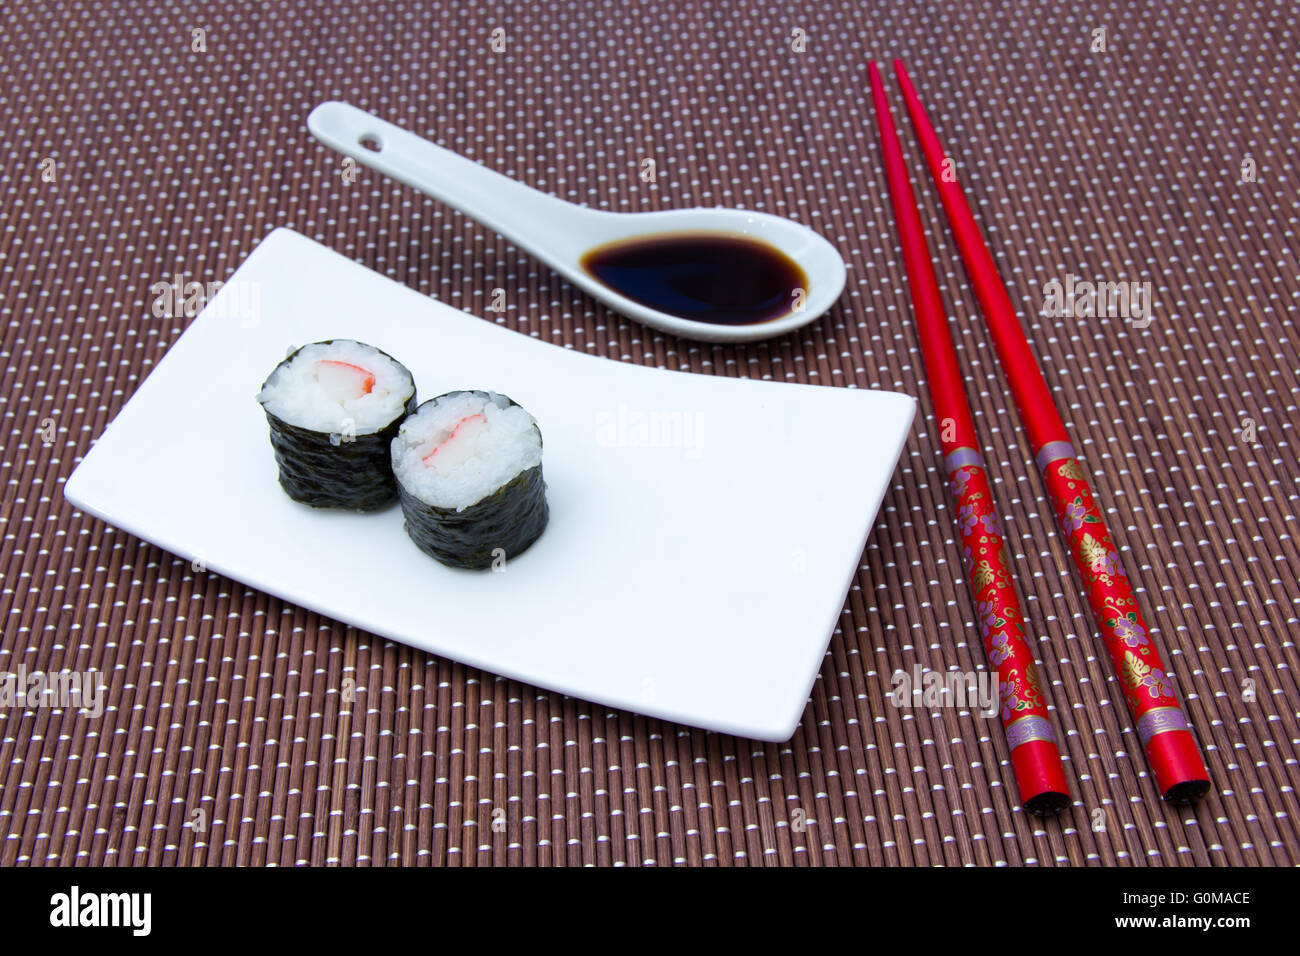 Maki with surimi on a bamboo mat Stock Photo